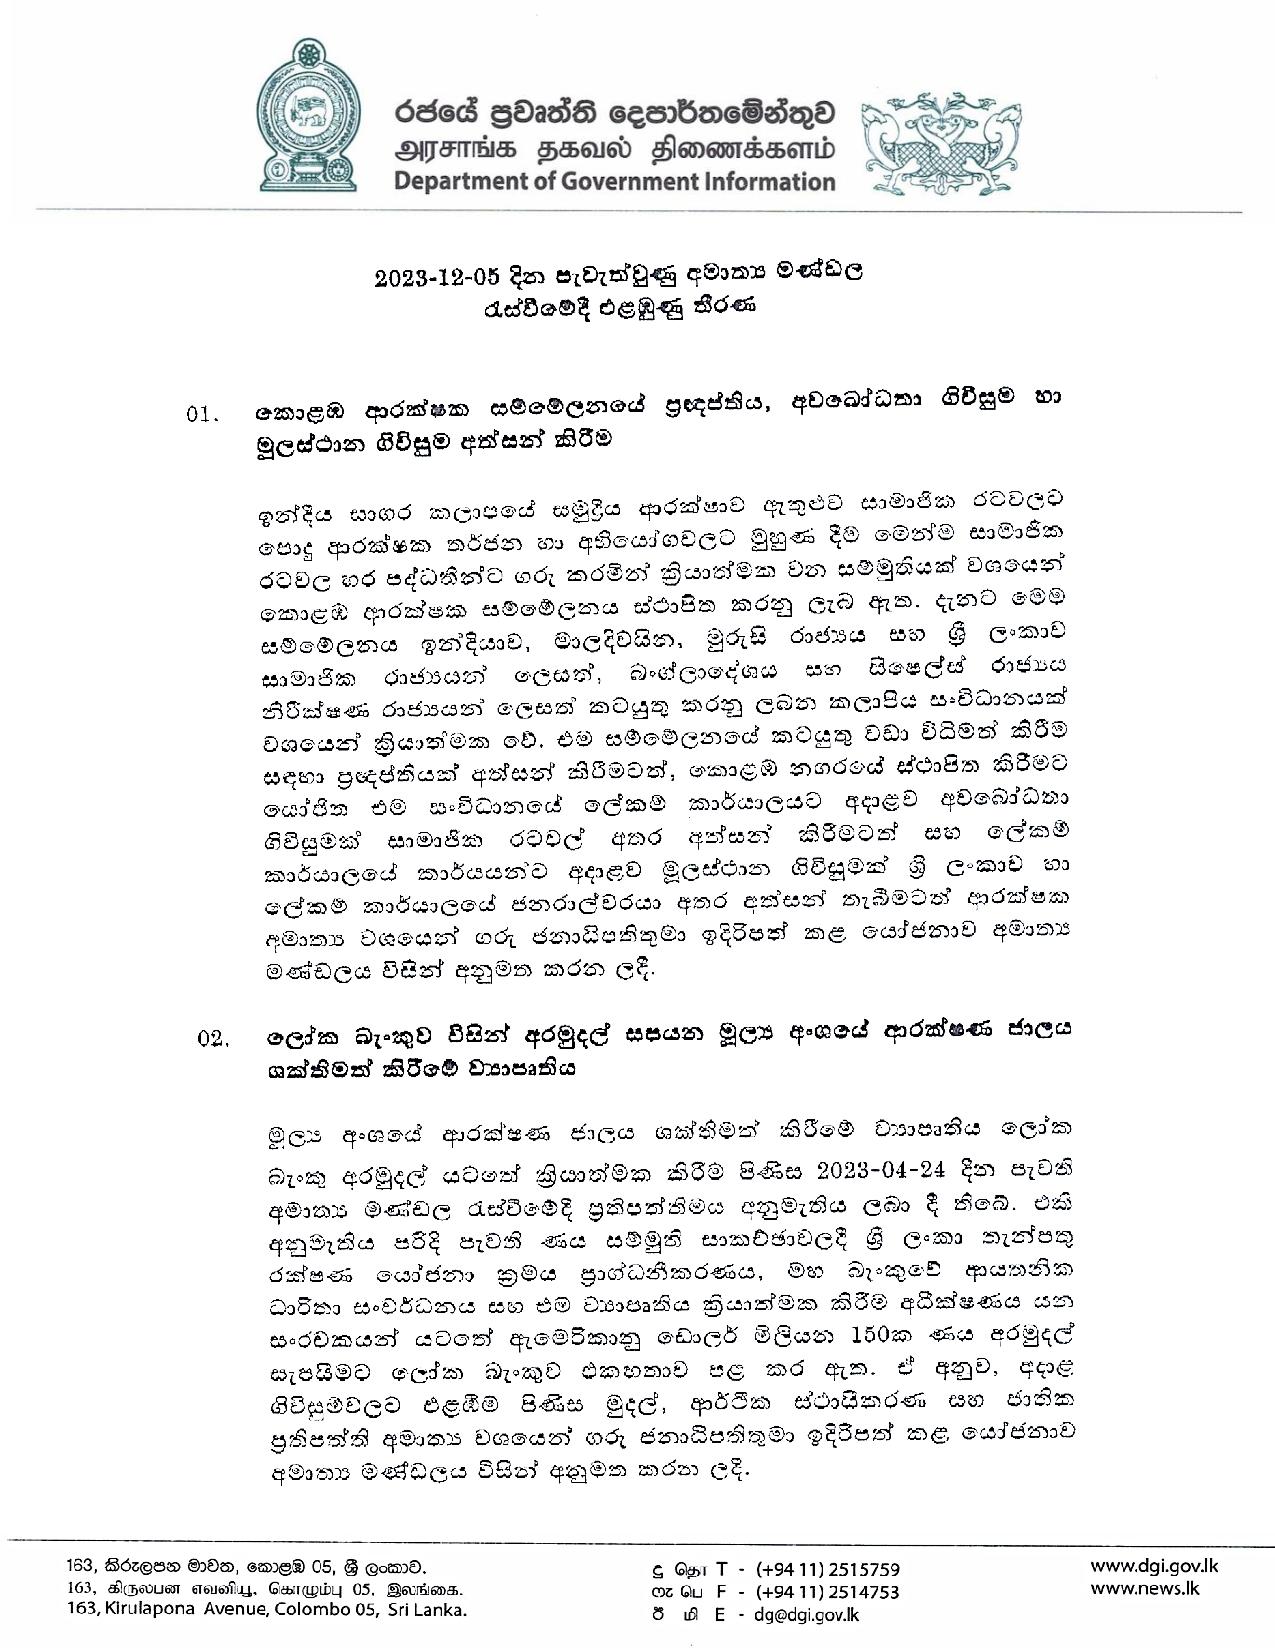 Cabinet Decision on 05.12.2023 page 001